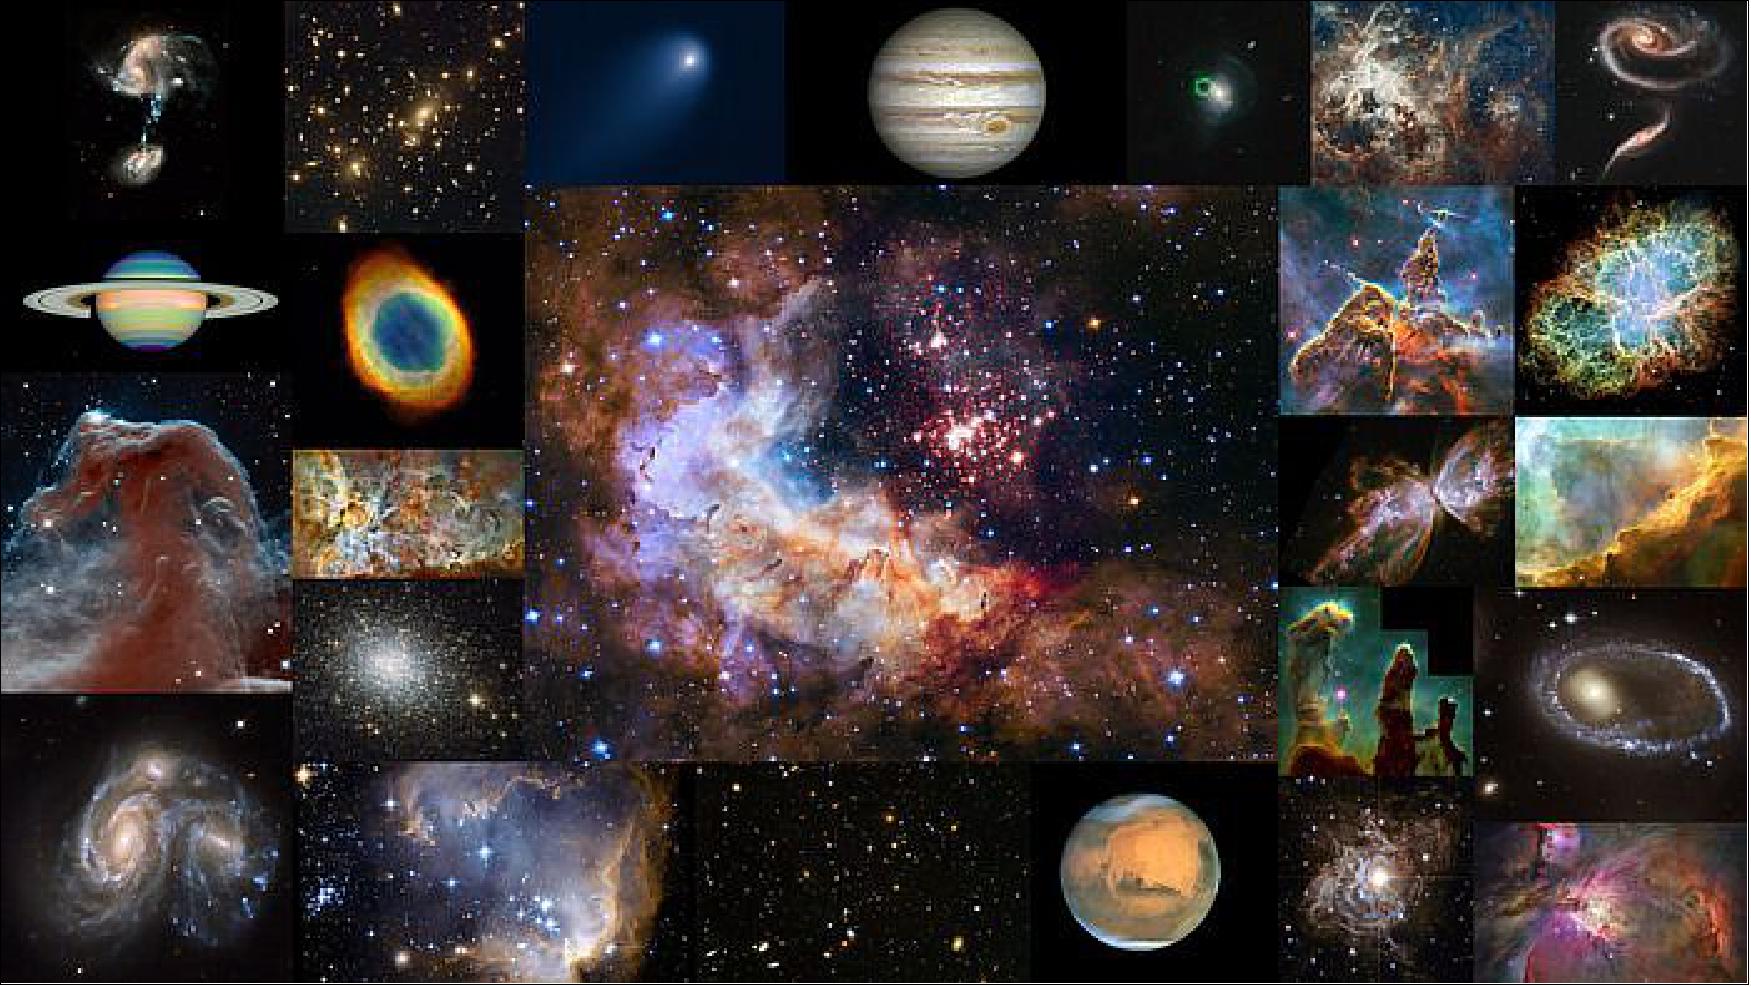 Figure 47: Collage of 25 images representing Hubble's rich contribution to our understanding of the Universe (image credit: NASA/ESA)